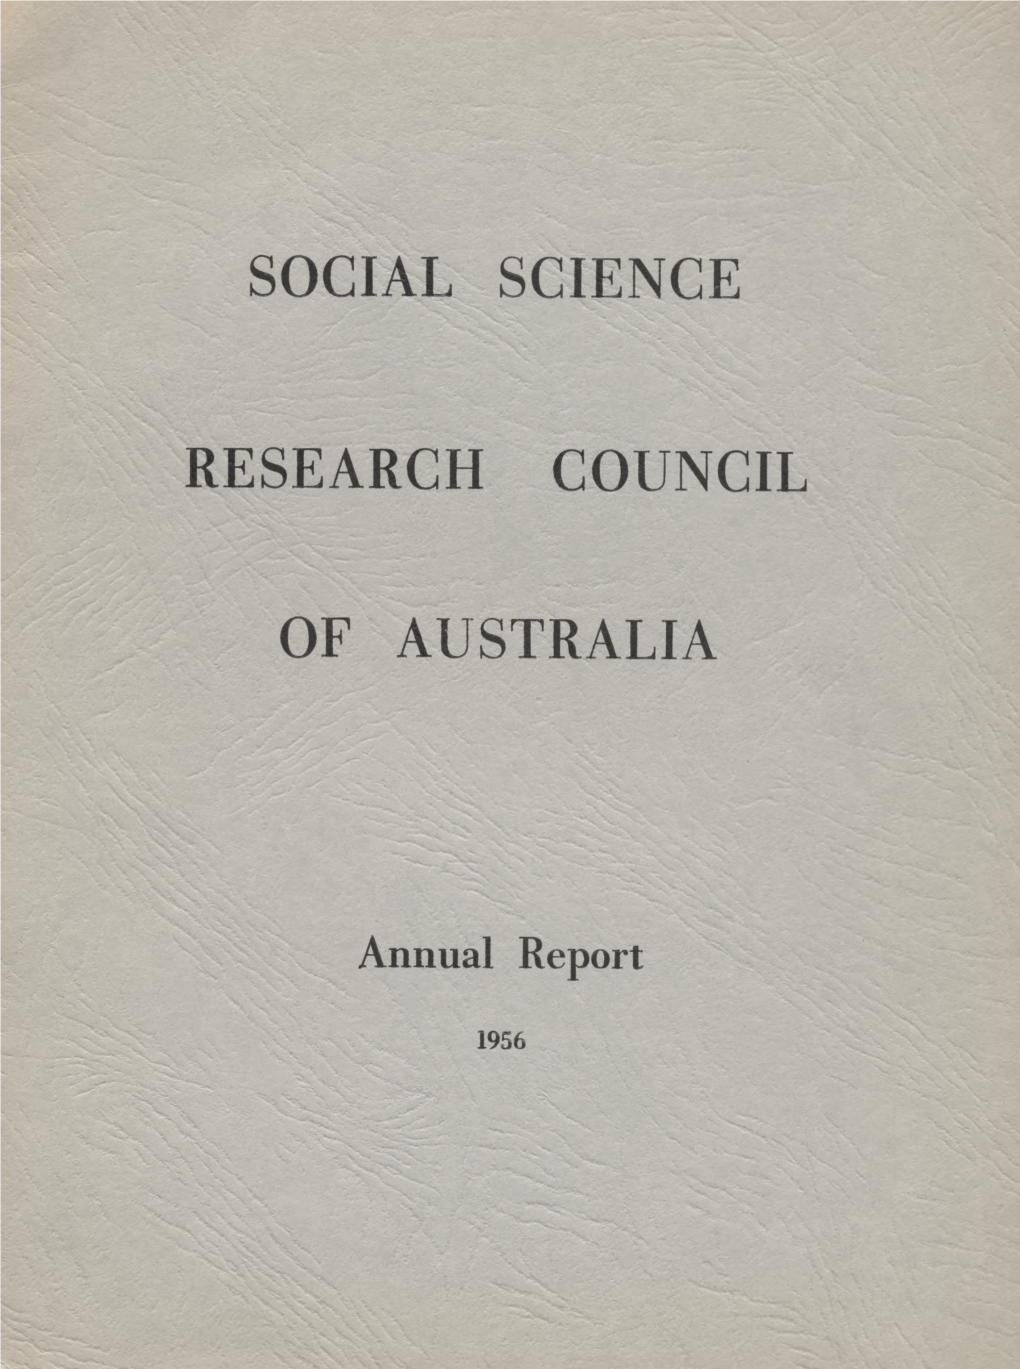 Annual Report 1956 the SOCIAL SCIENCE RESEARCH COUNCIL of AUSTRALIA Was Established in 1952